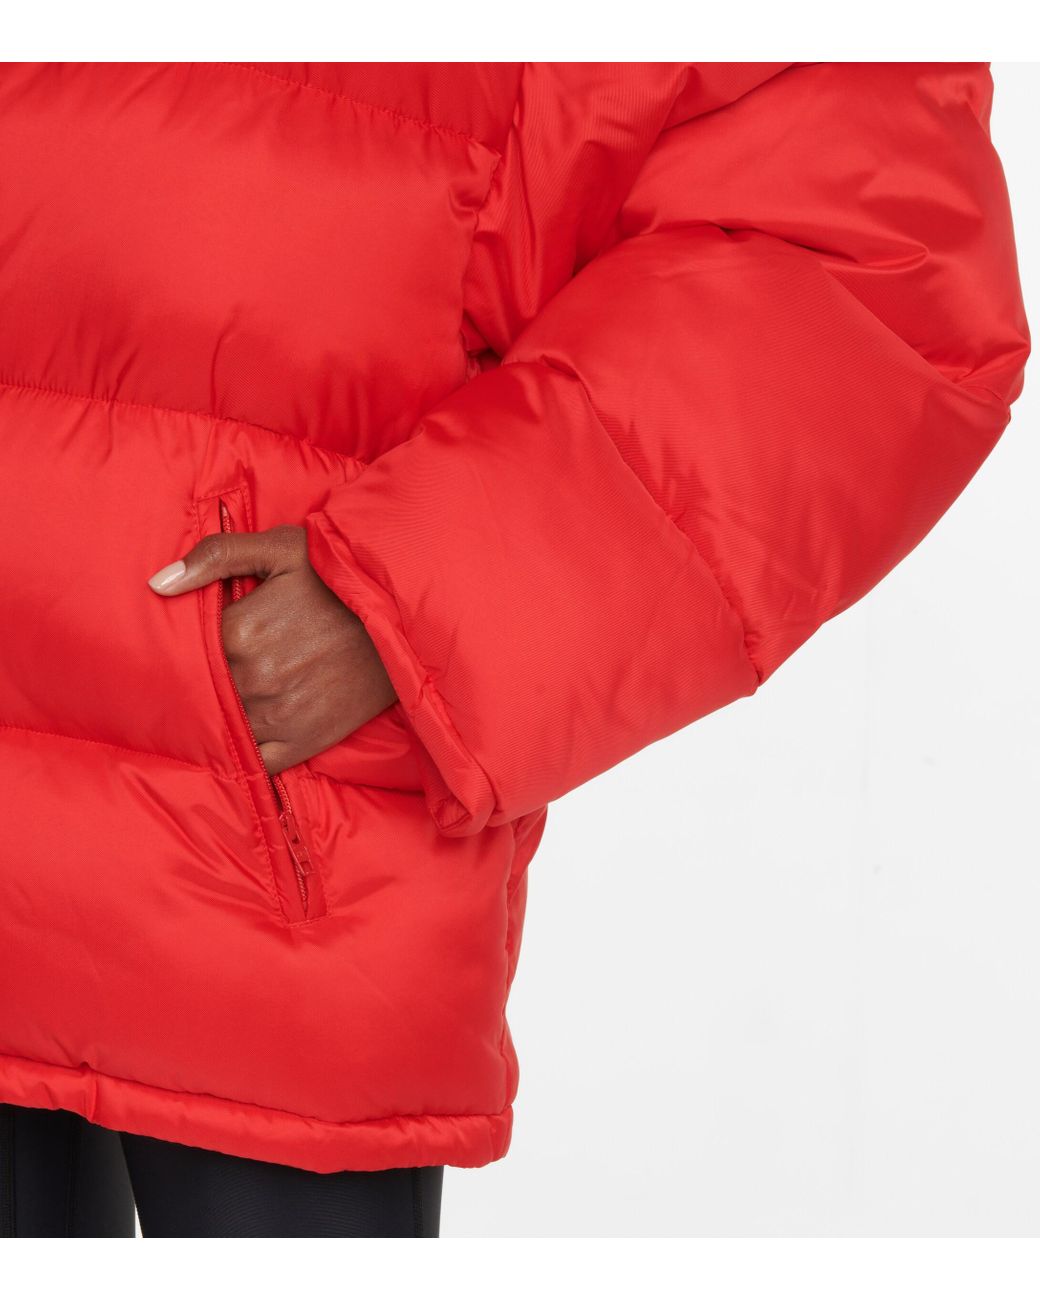 Balenciaga Synthetic Off-shoulder Puffer Jacket in Red - Lyst